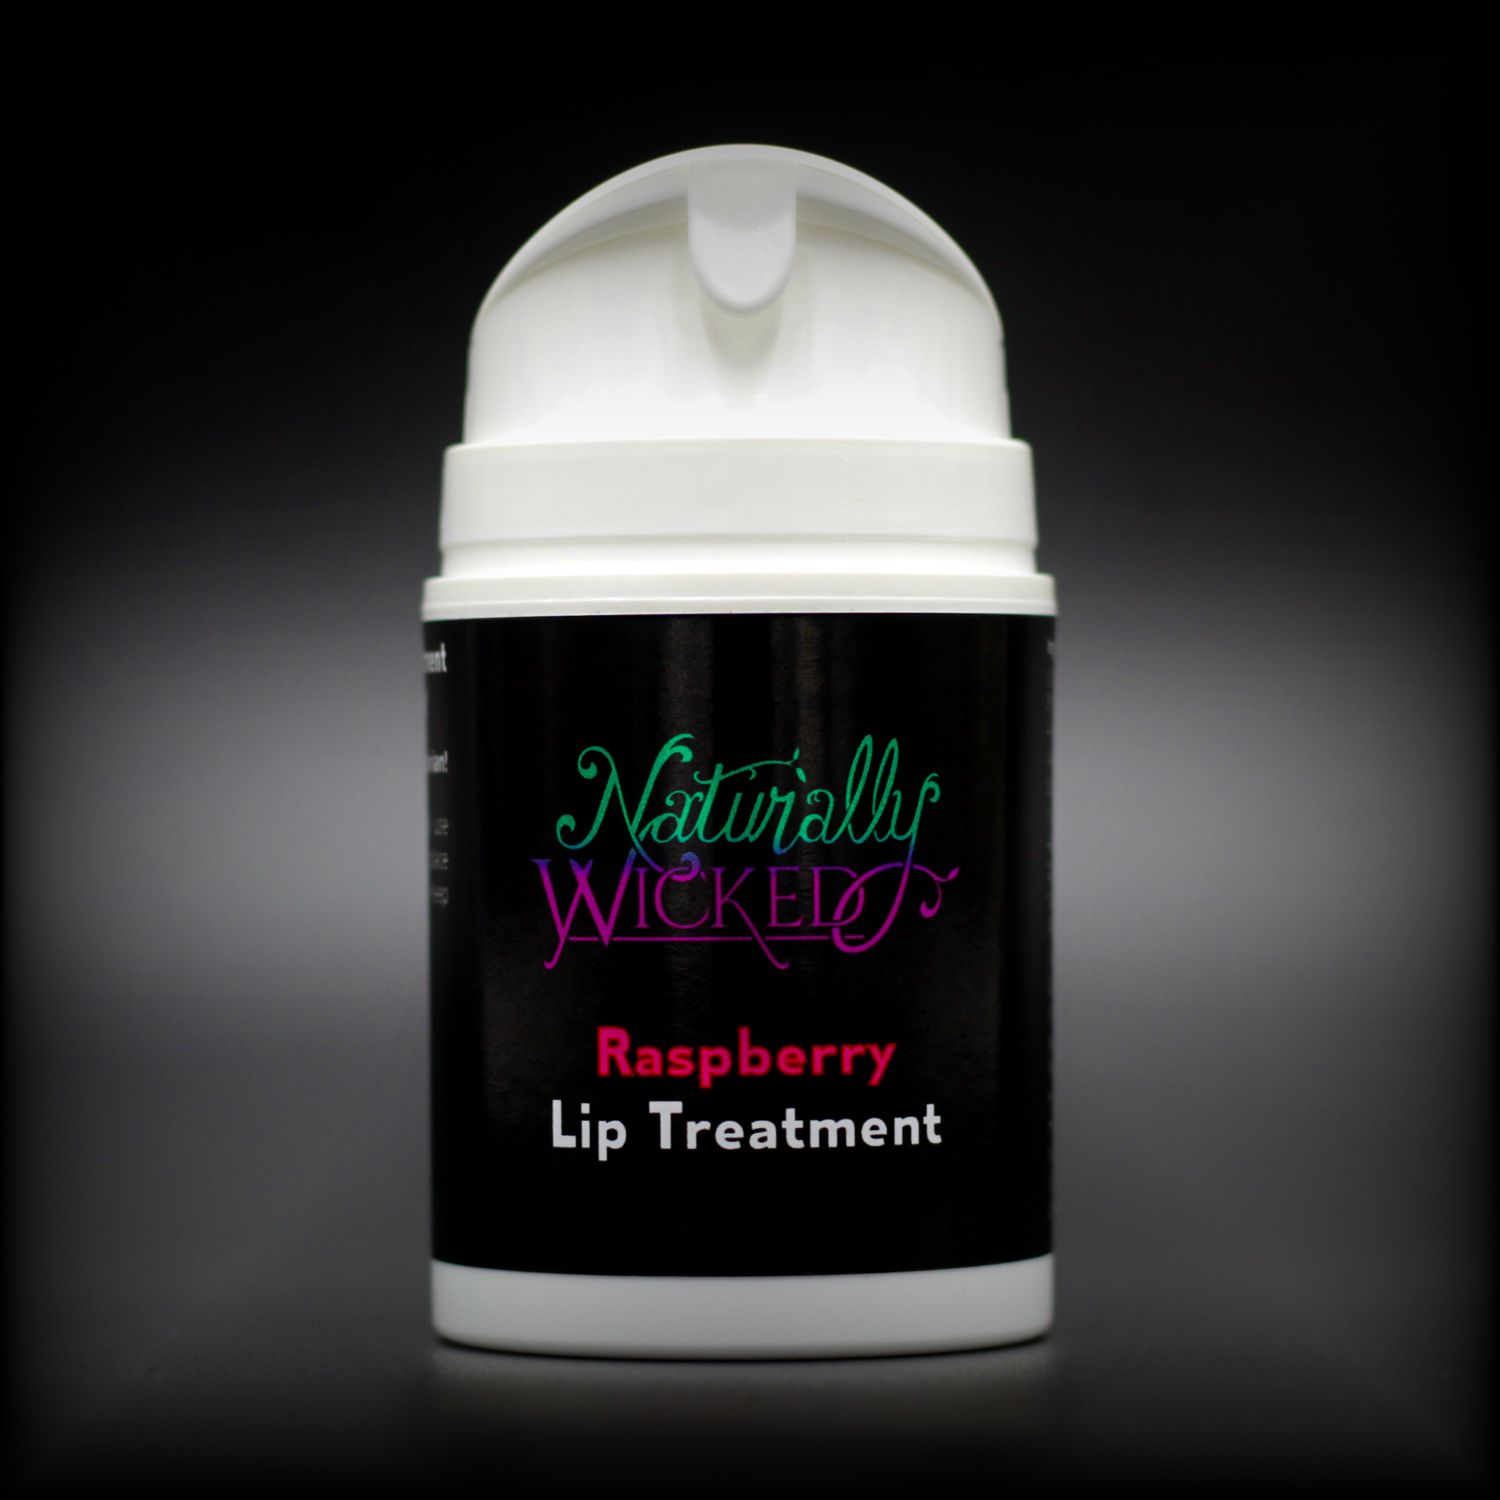 Naturally Wicked Raspberry Lip Treatment Container Without Lid Revealing Dispenser & Protective Seal